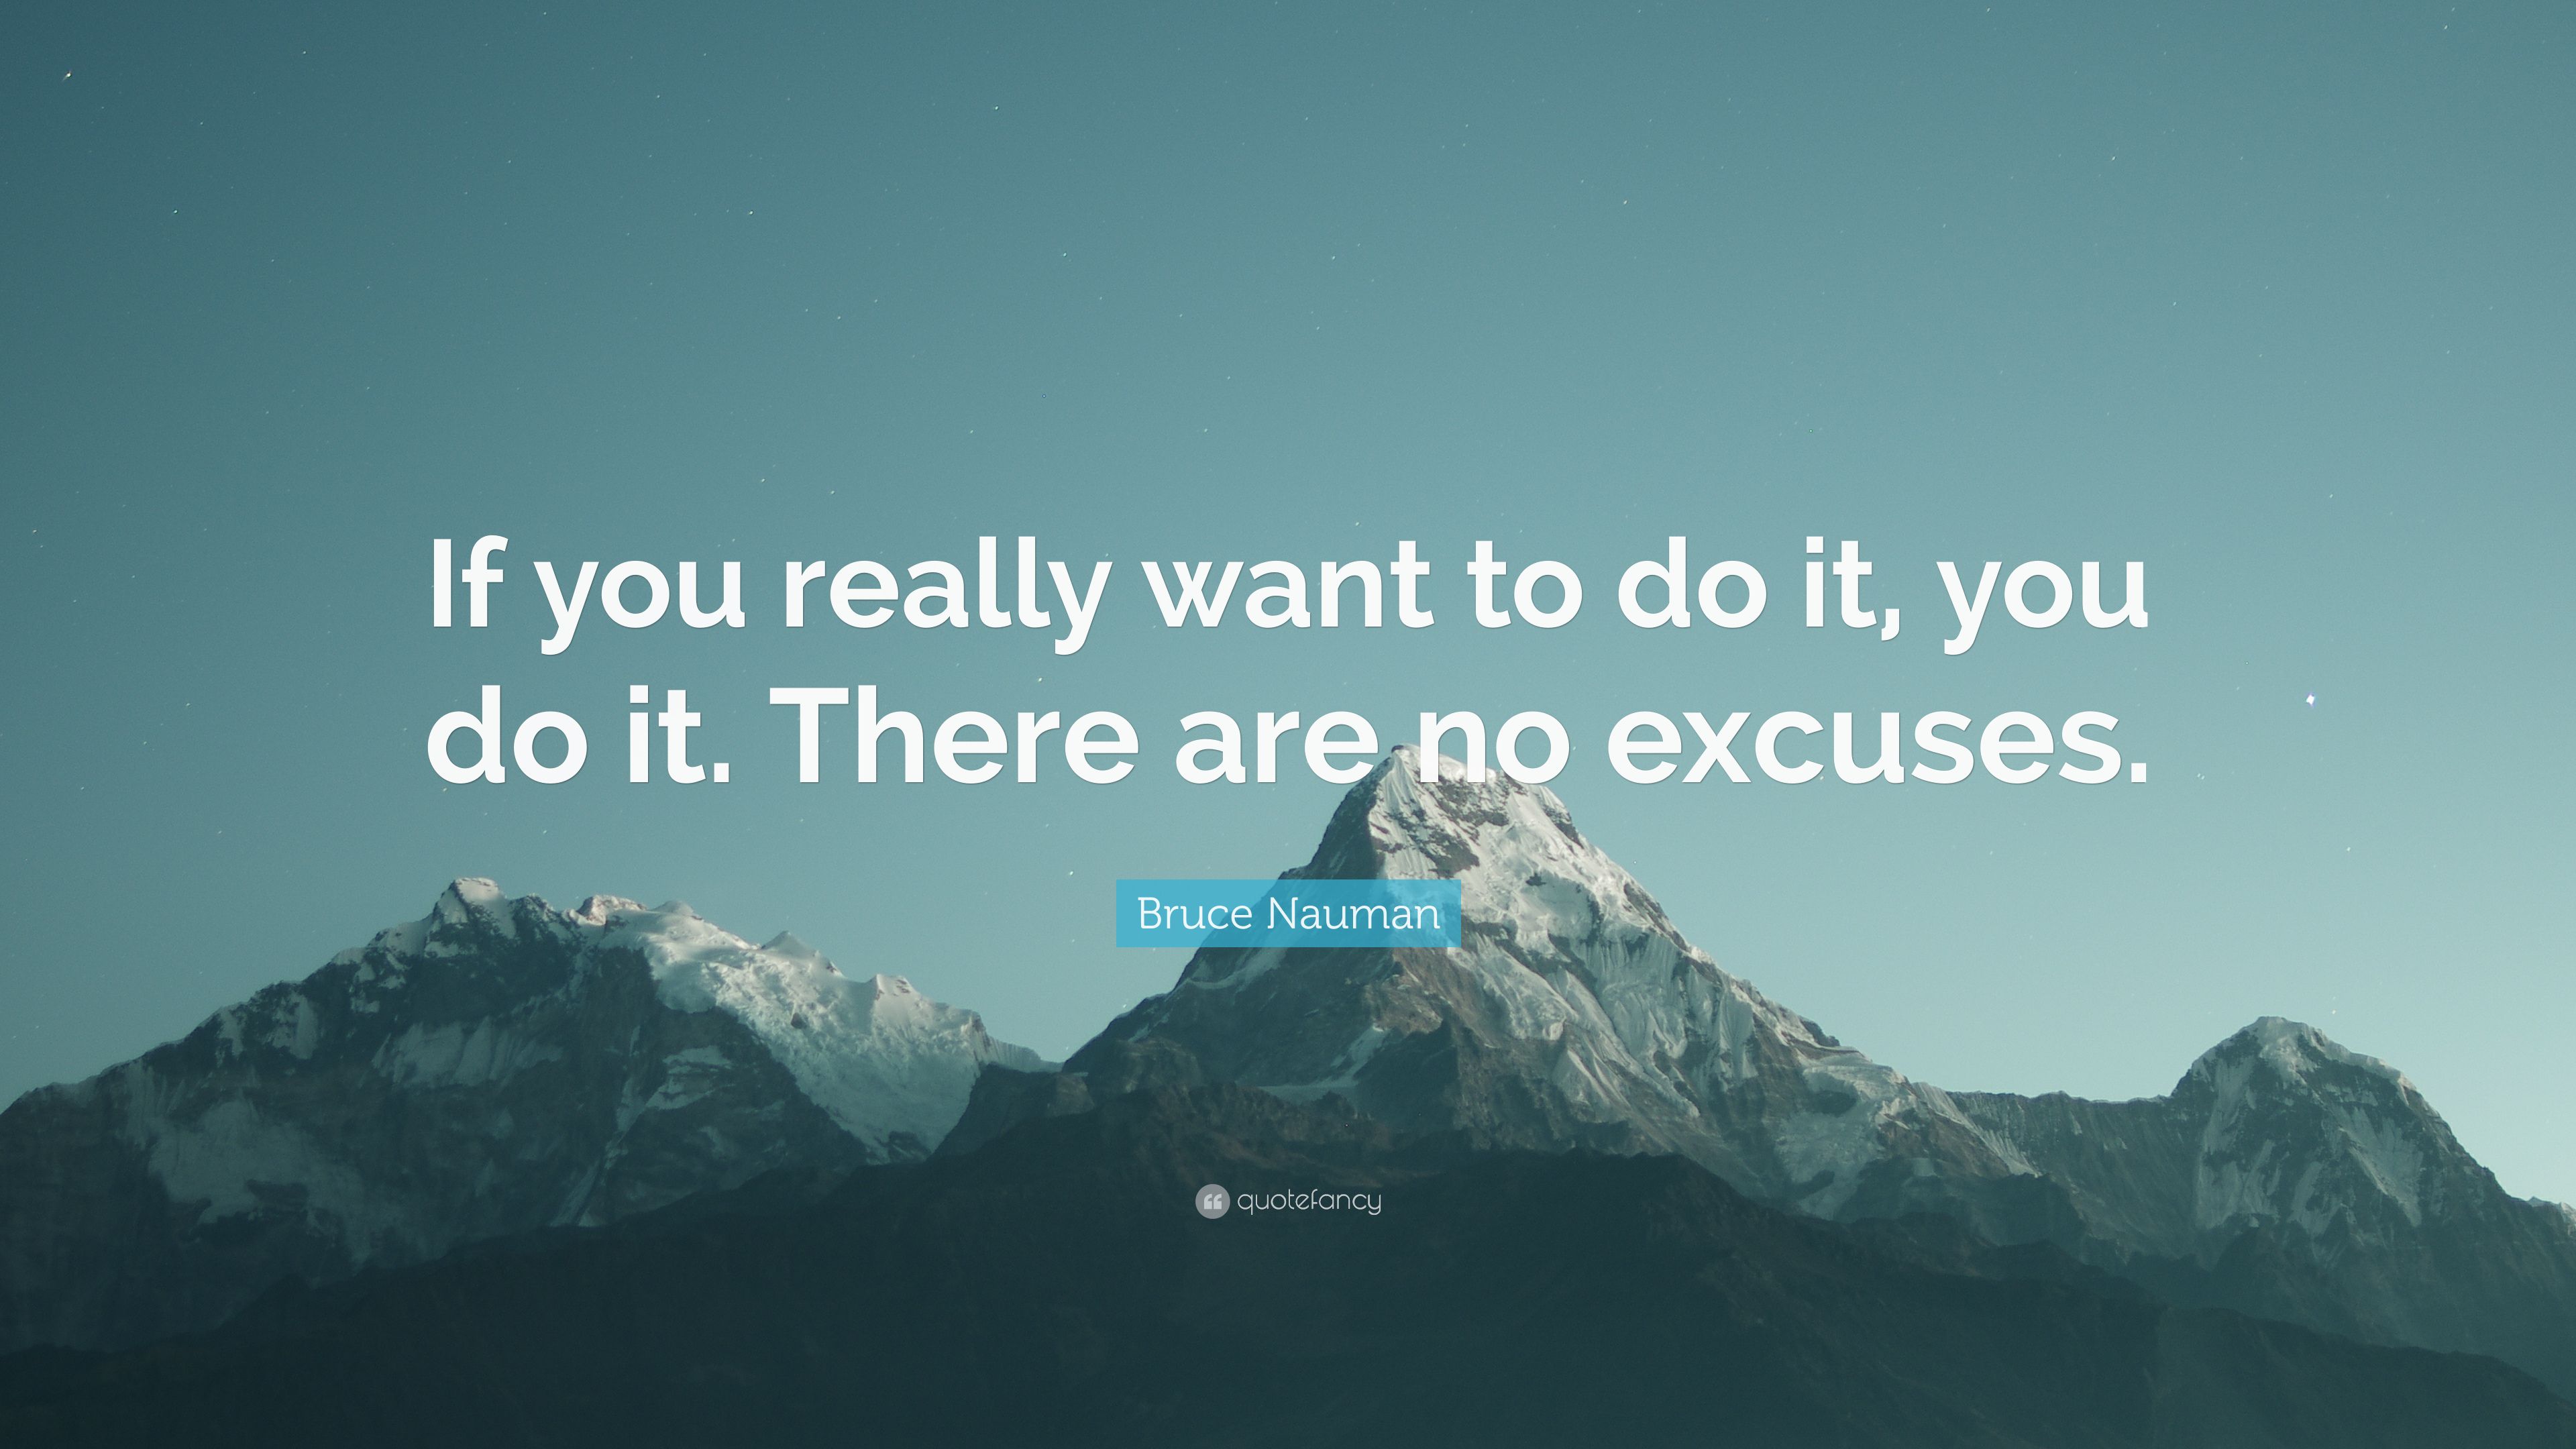 Bruce Nauman Quote: “If you really want to do it, you do it. There are no excuses.” (7 wallpaper)